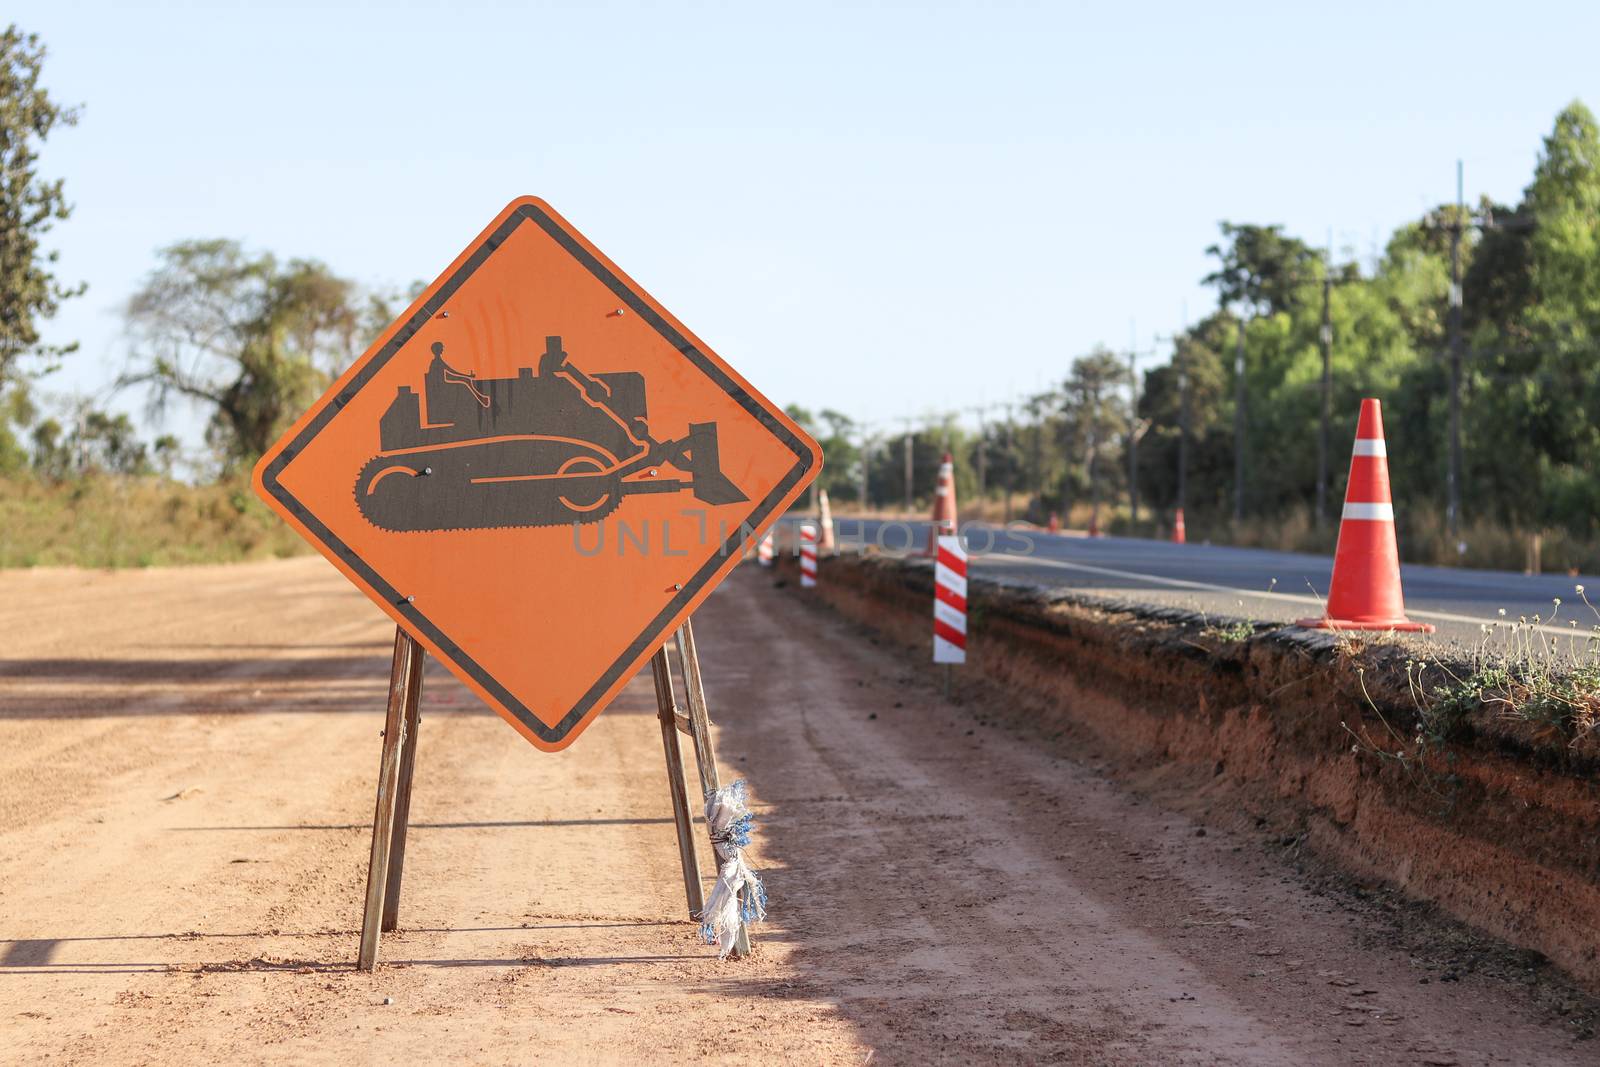 The orange sign shows the machine symbol being operating on the side of the road. Warning sign indicating road work is ahead. by Eungsuwat